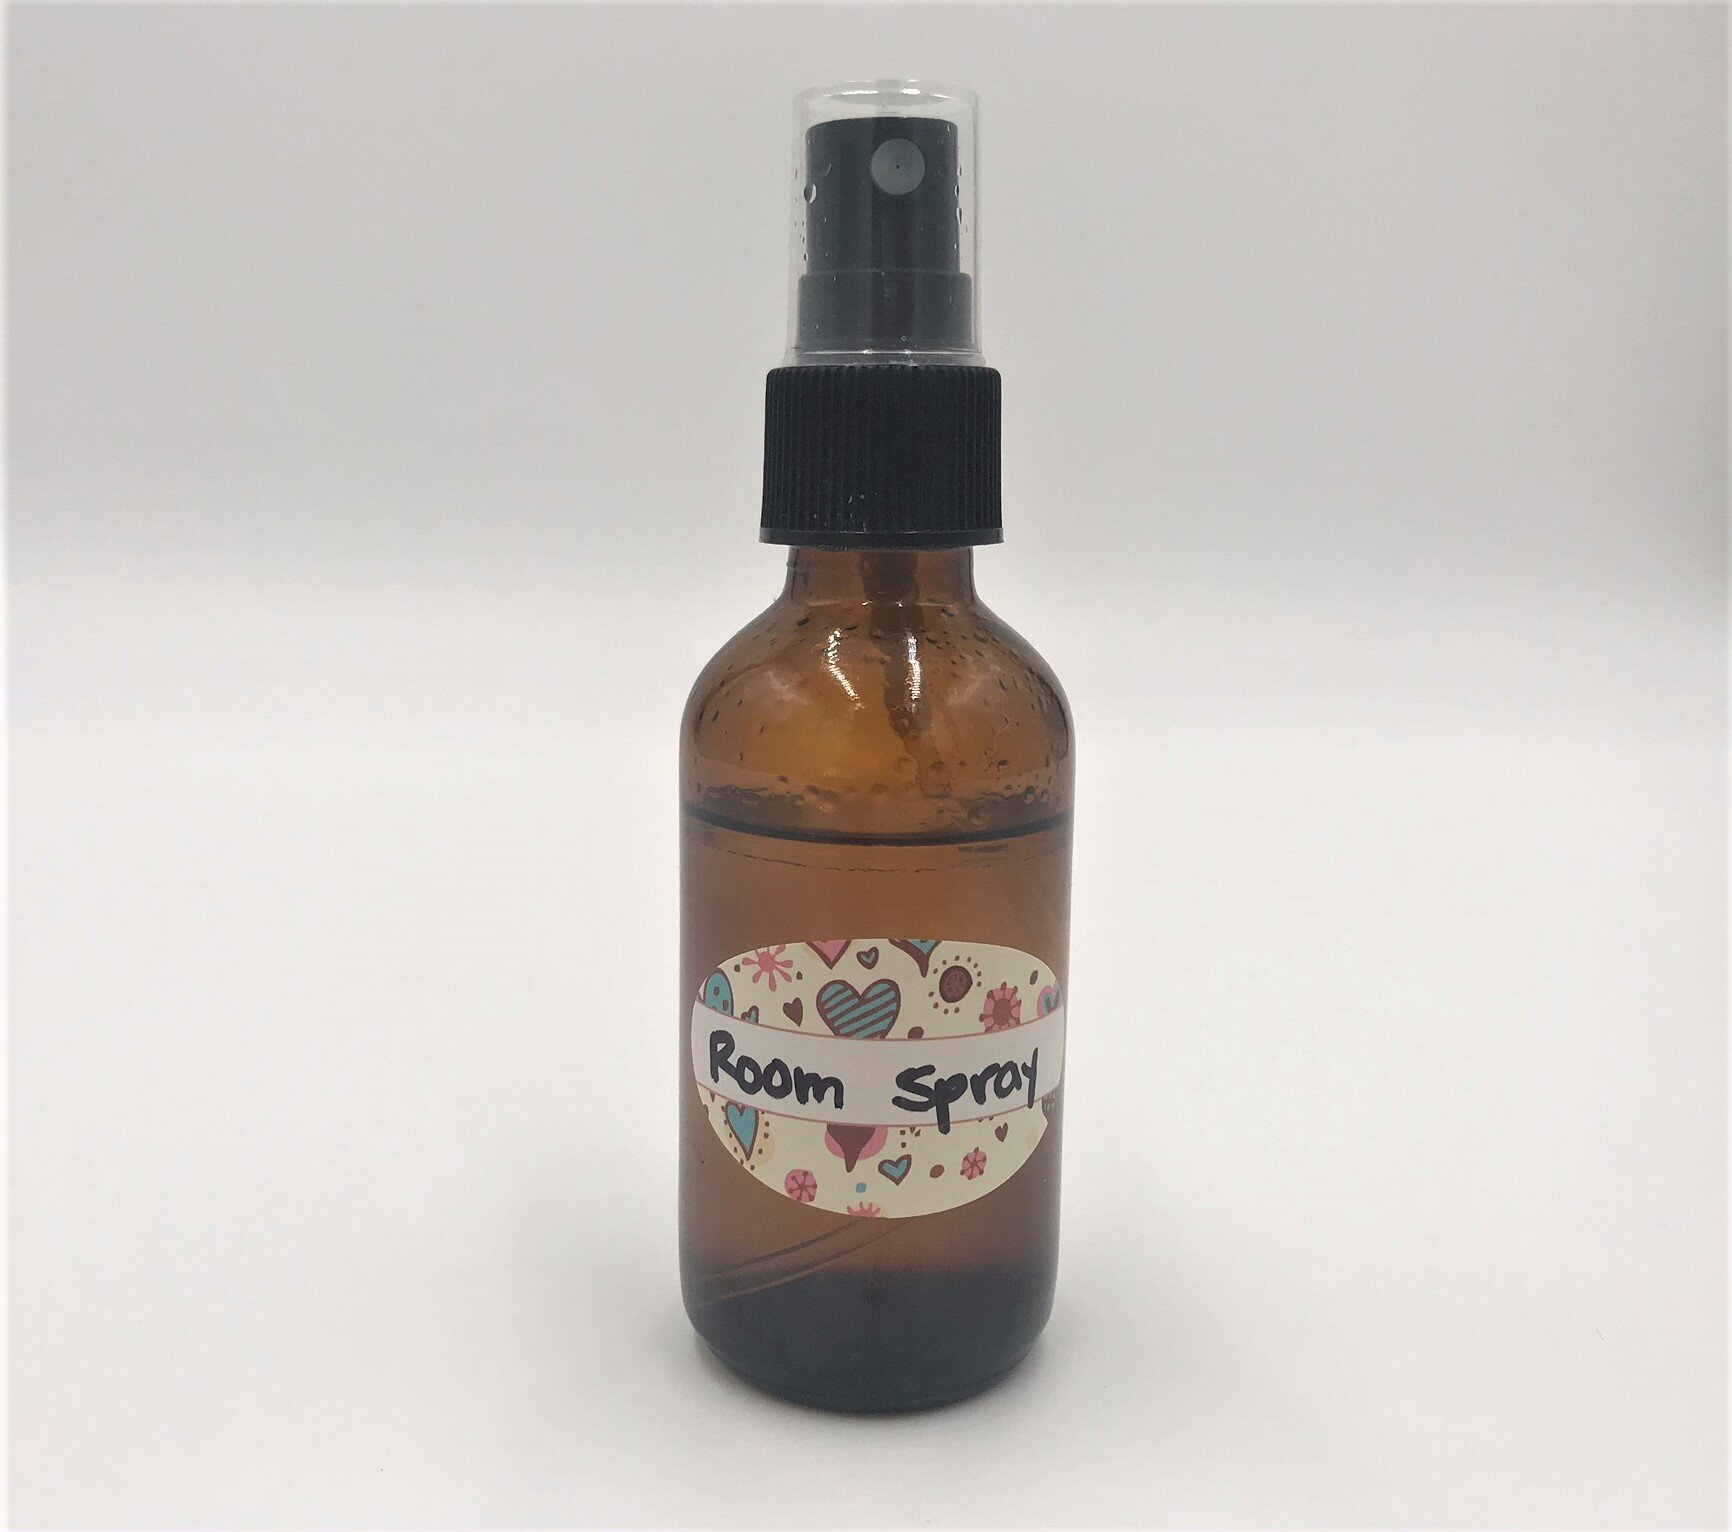 DIY room spray  is a non-toxic alternative. The best part is that you can customize the scent. You could even use it as a pillow spray to aid sleep or calm anxious pets.